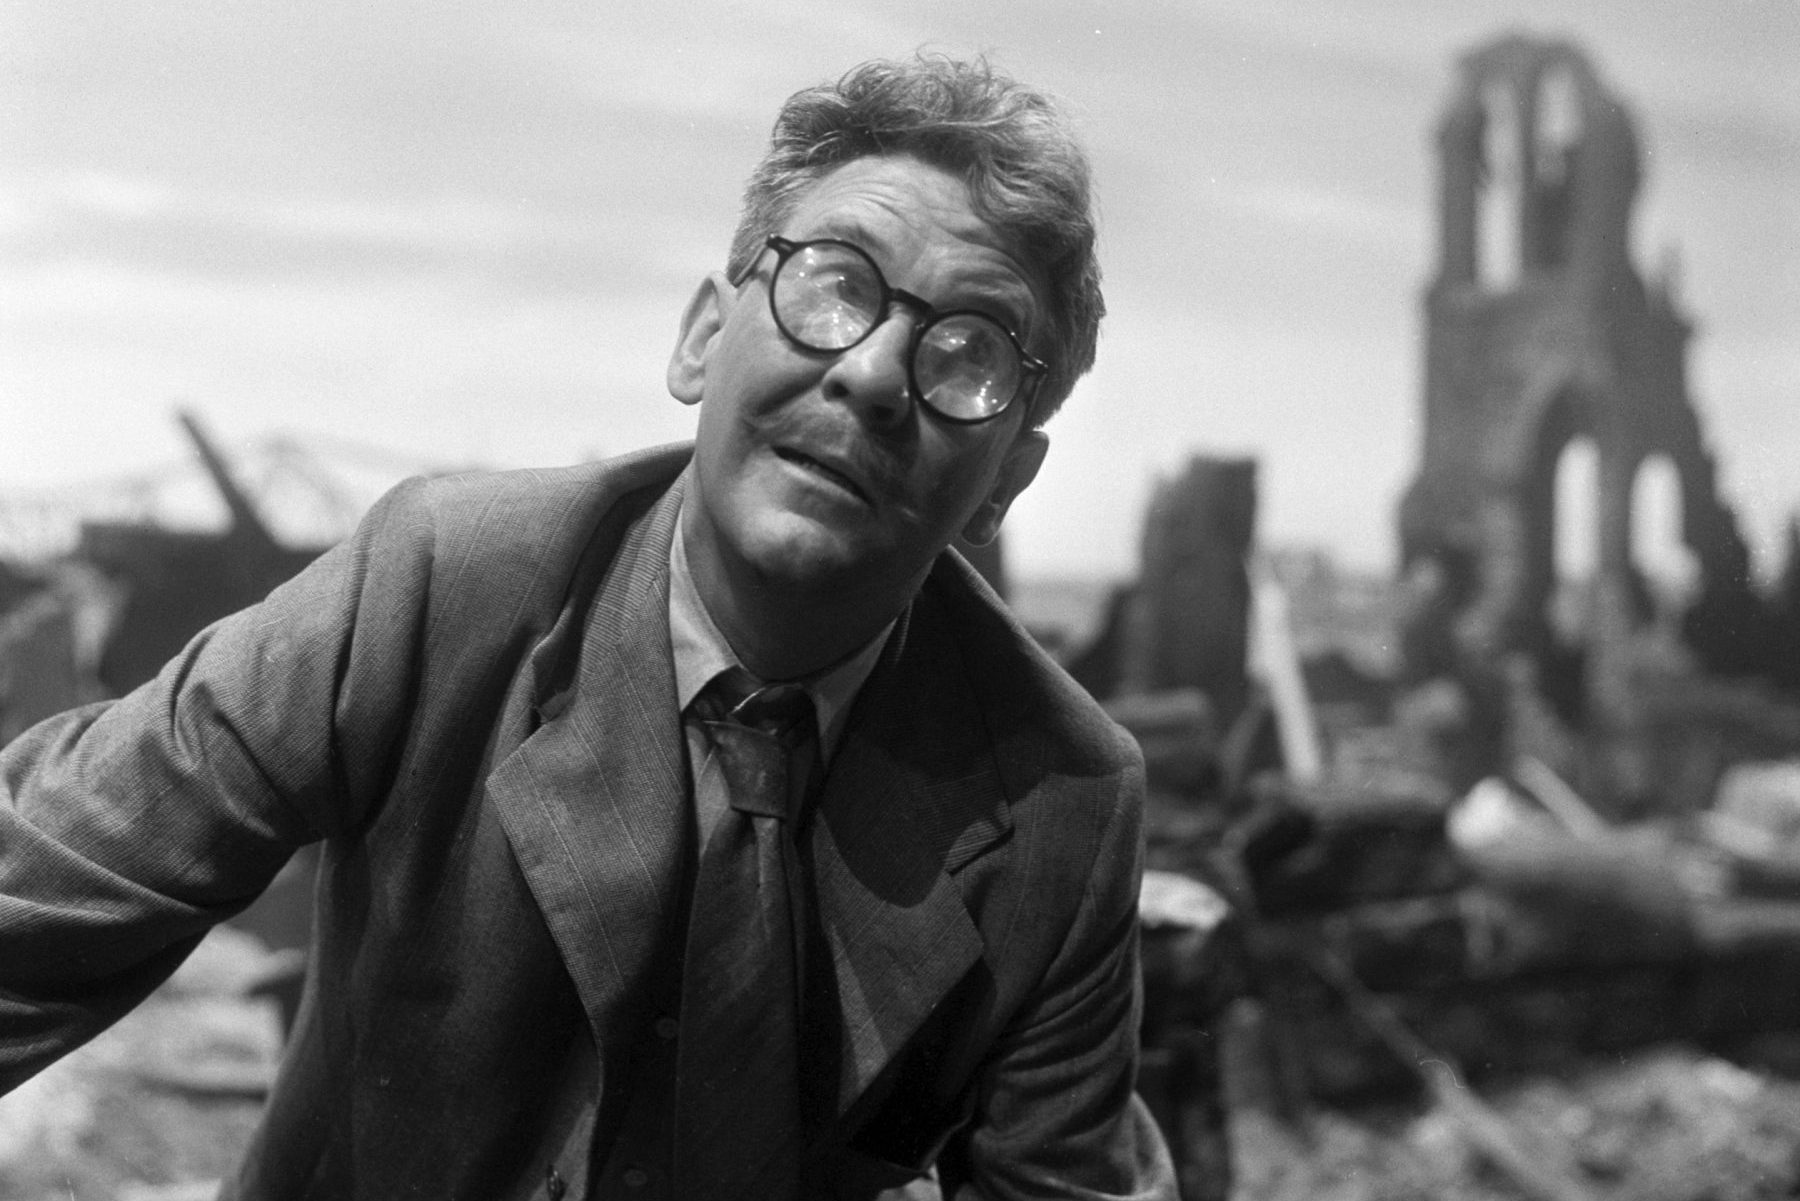 In an article about the Twilight Zone, a picture of Burgess Meredith playing Henry Bemis in the episode "Time Enough at Last"